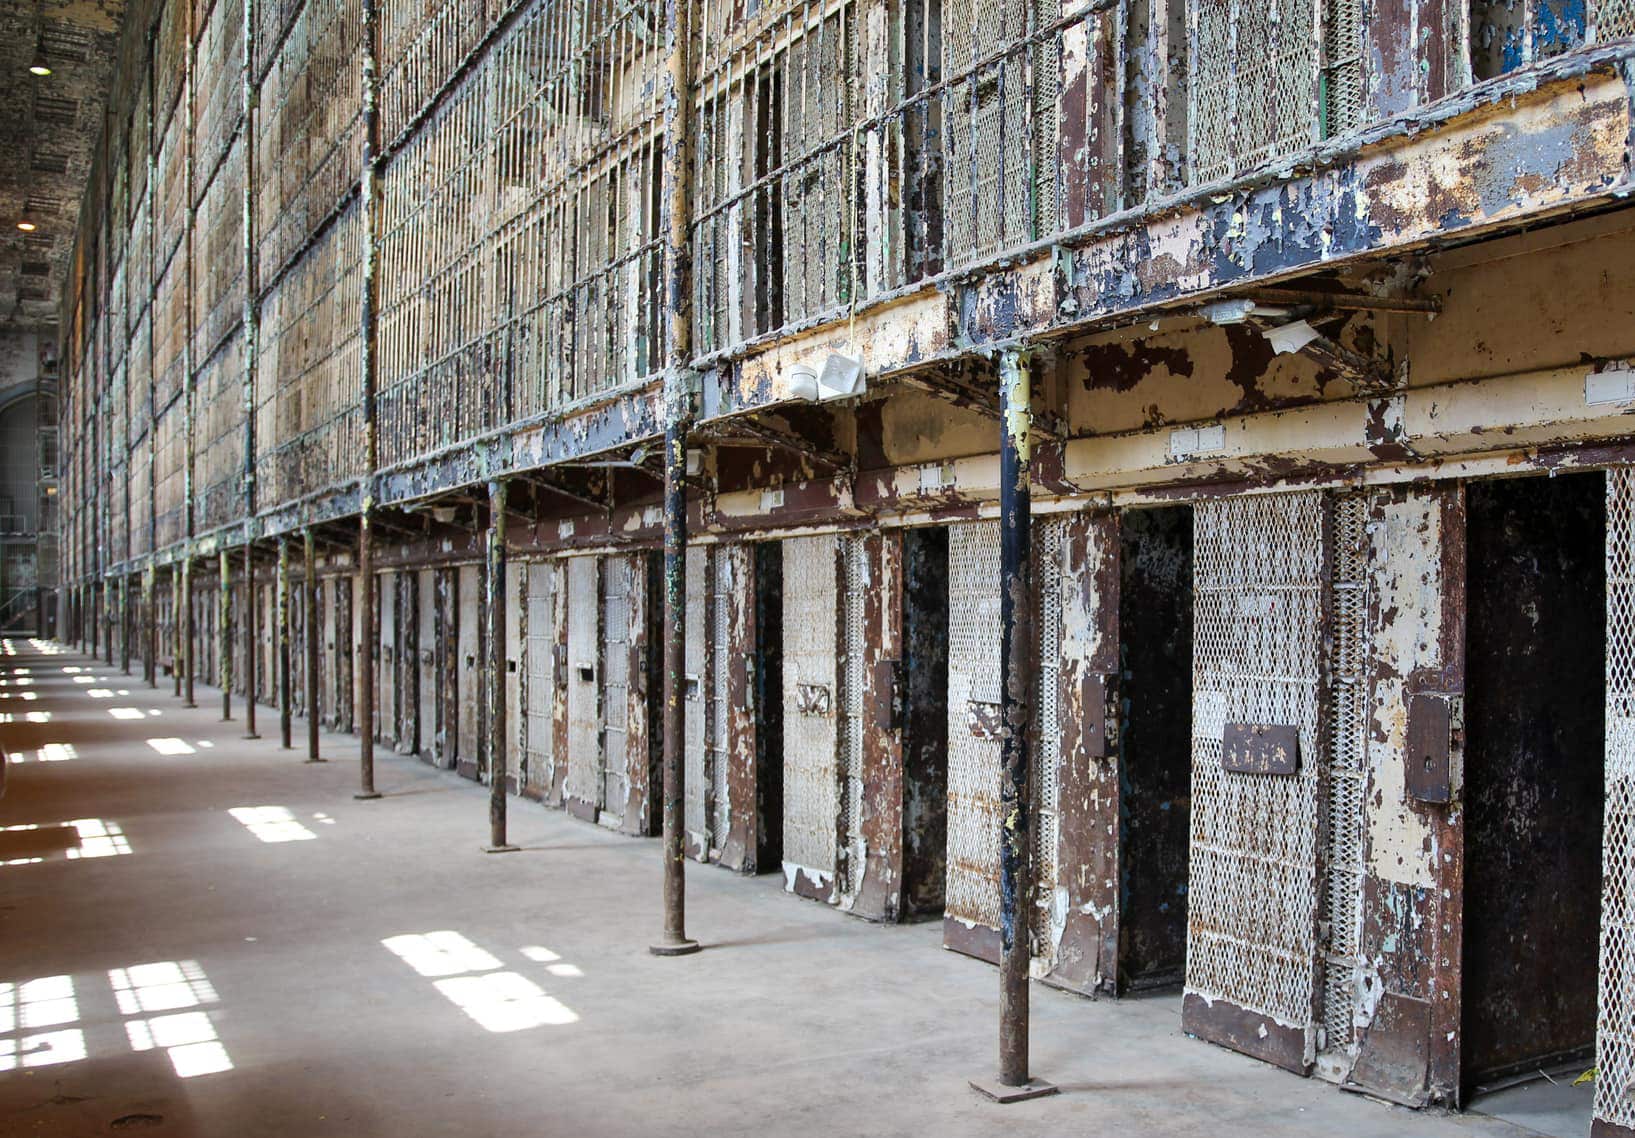 30 years after ‘Shawshank Redemption,’ fans still flock to the Ohio State Reformatory